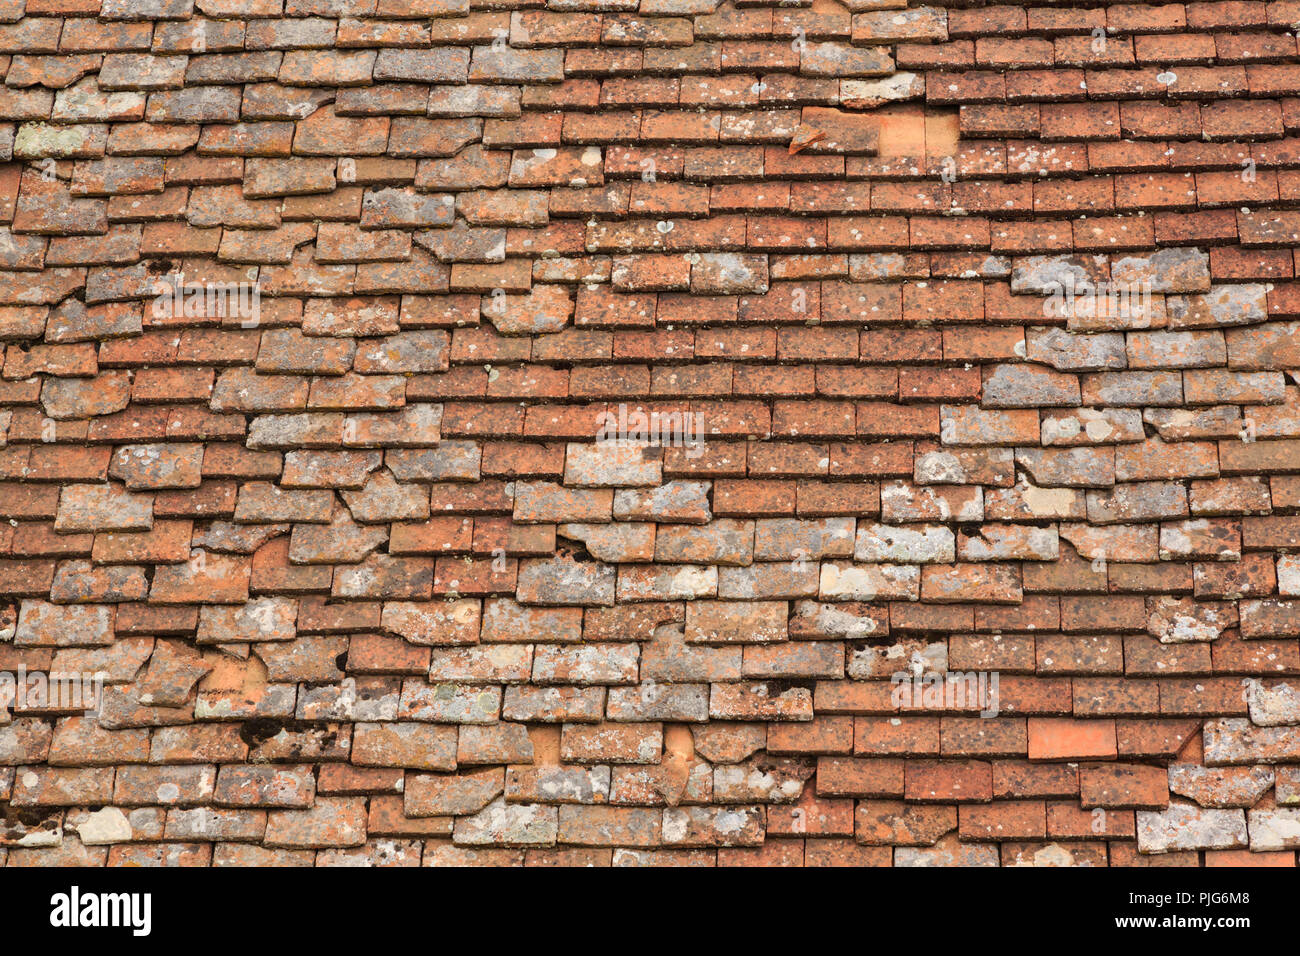 Old, distressed clay roof tiles. Stock Photo